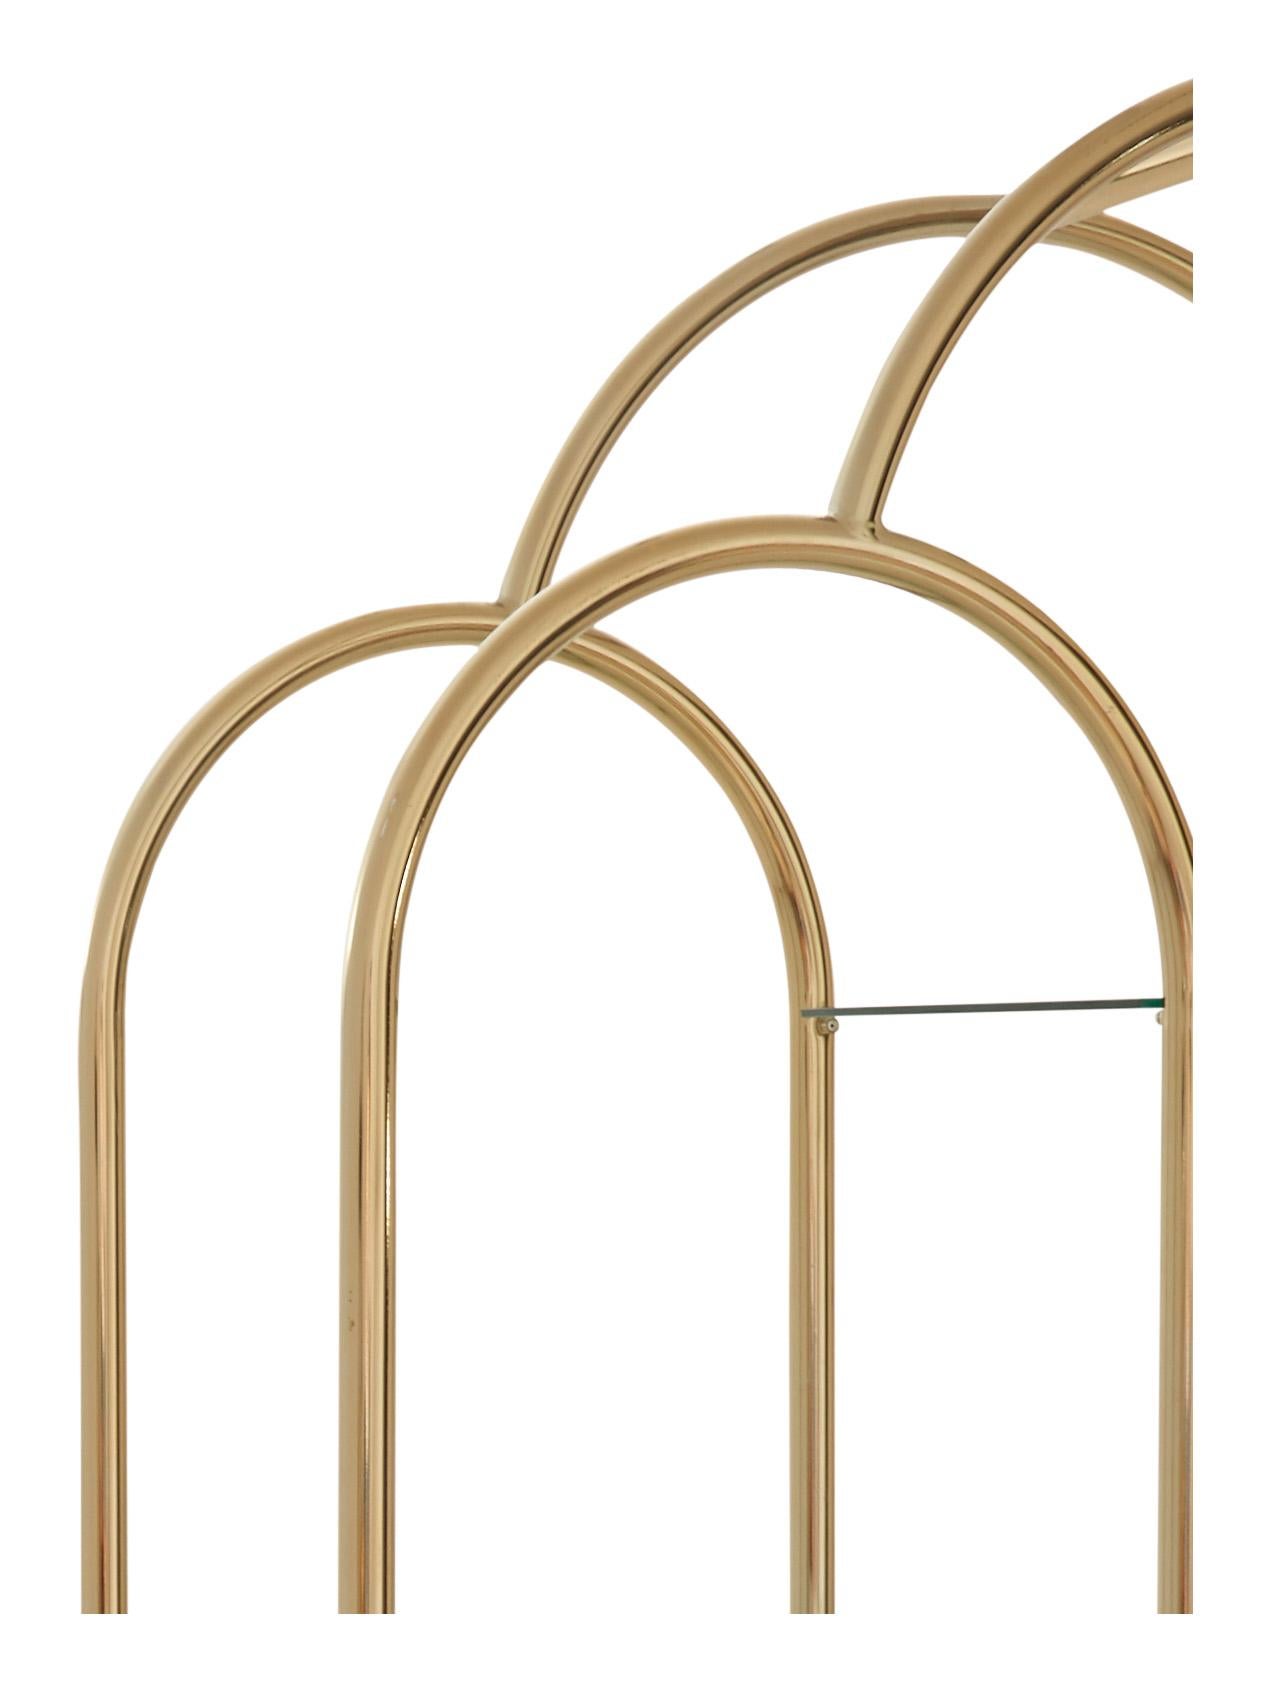 American Midcentury Rounded Brass Étagère